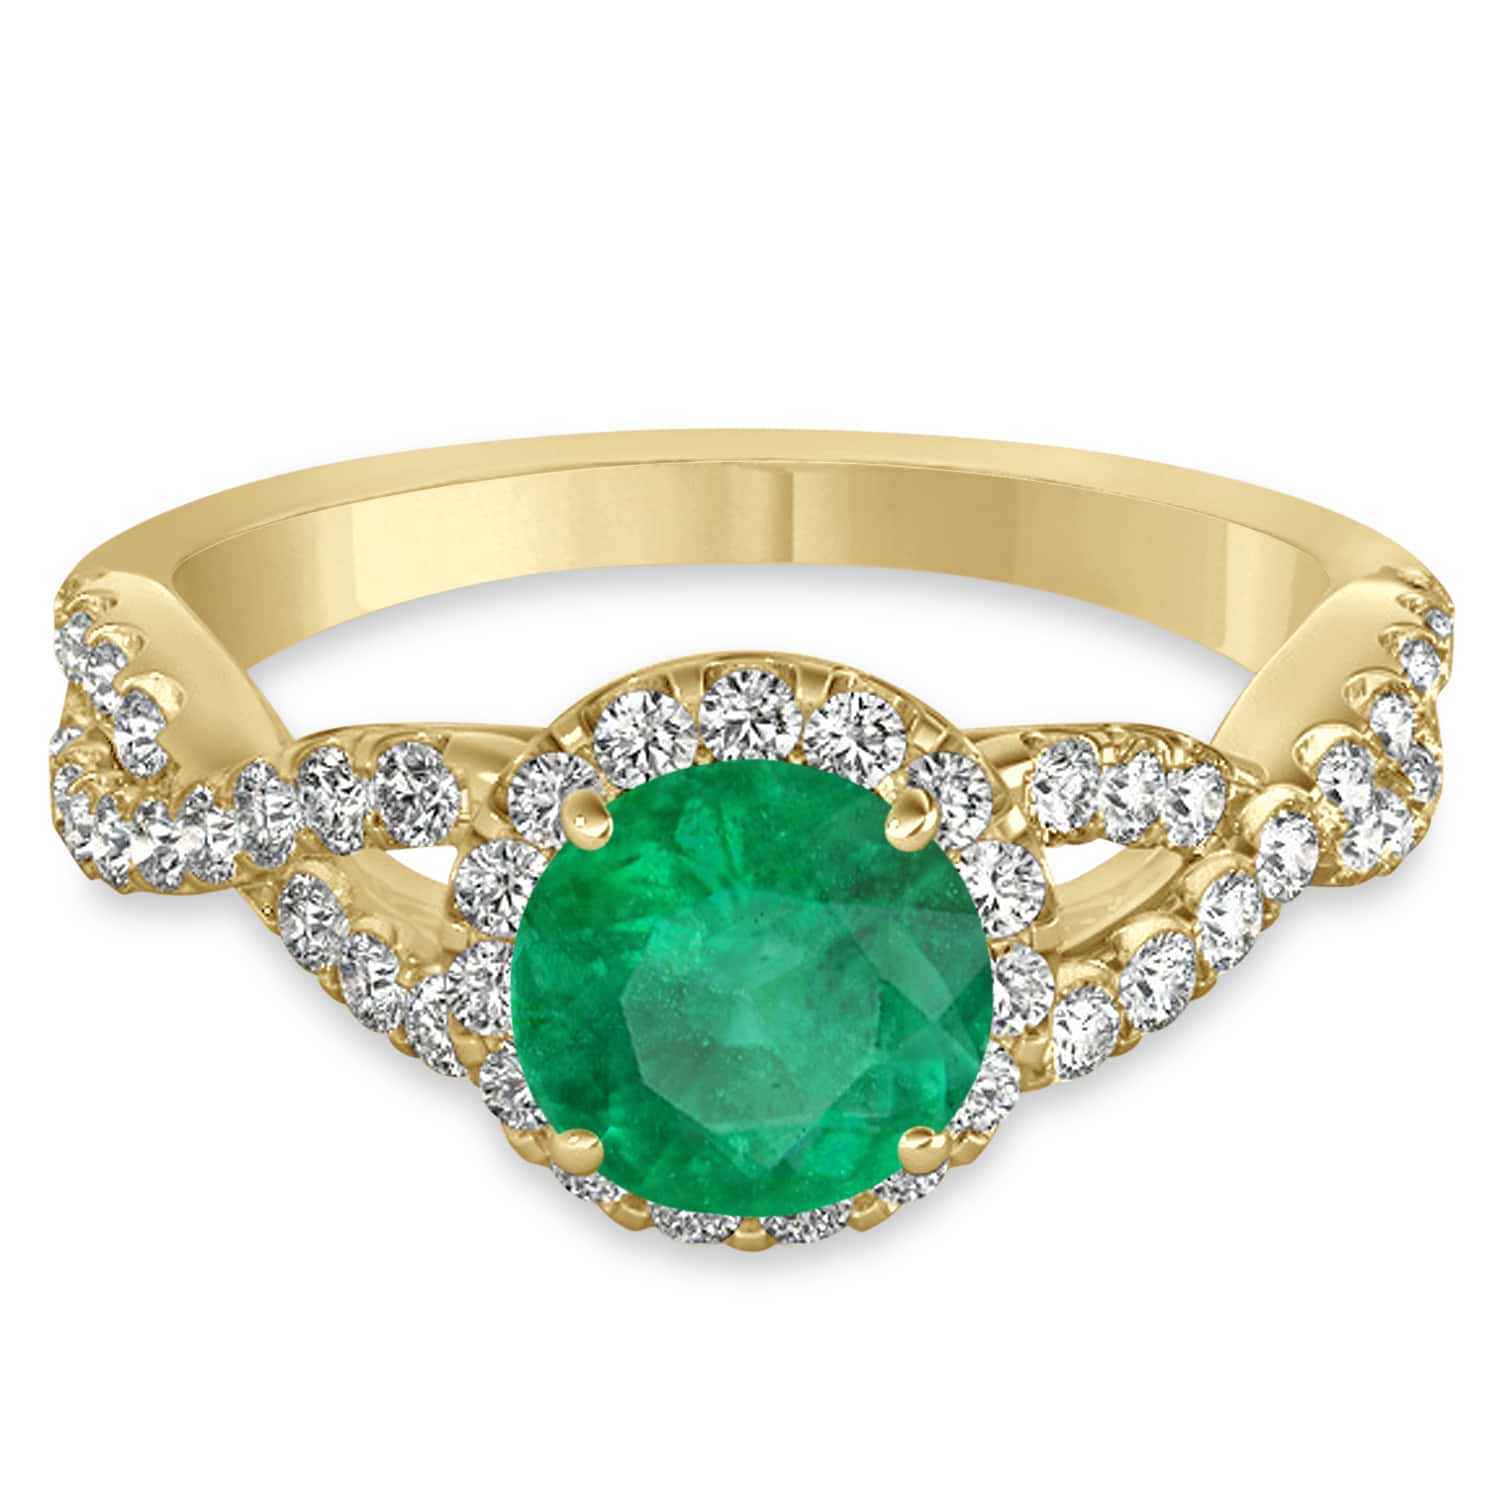 Emerald & Diamond Twisted Engagement Ring 14k Yellow Gold 1.30ct